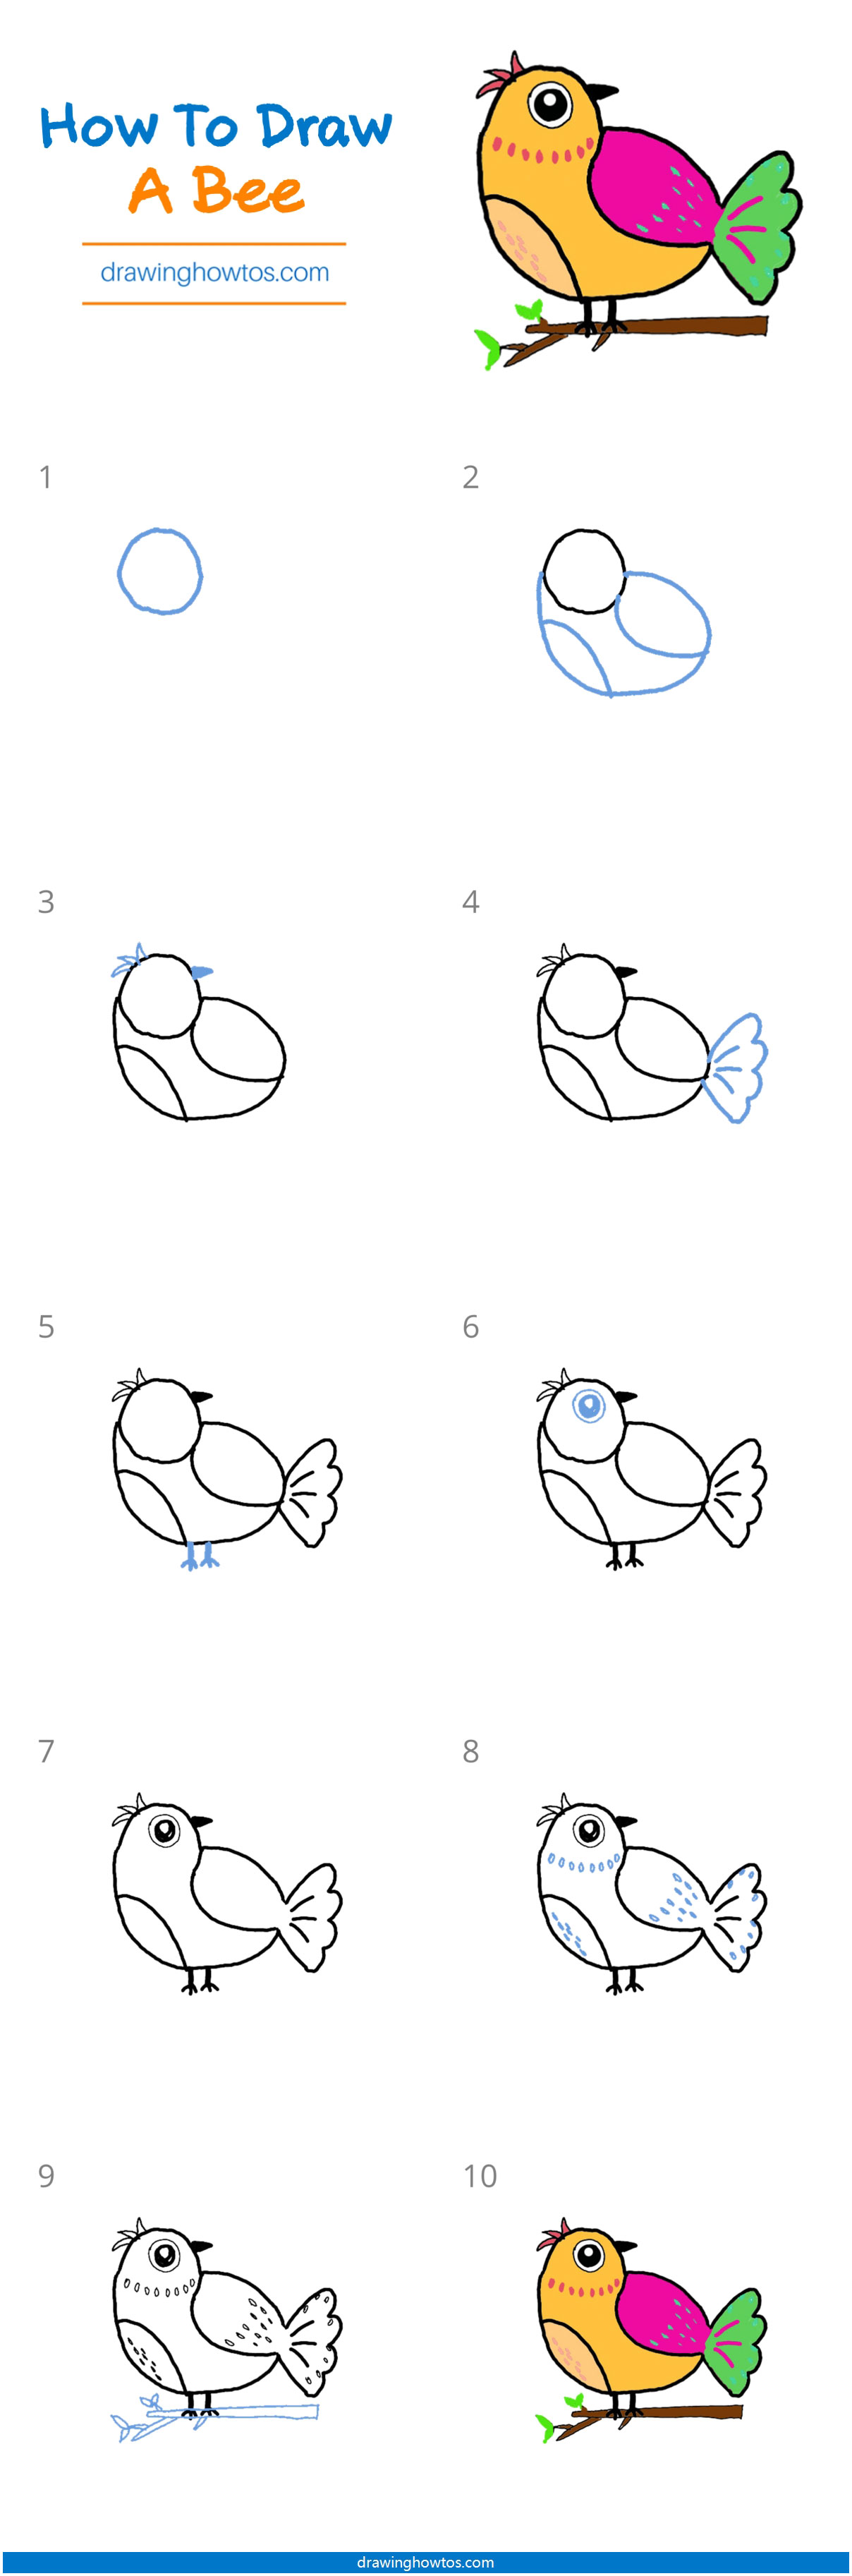 How to Draw a Bird Step by Step